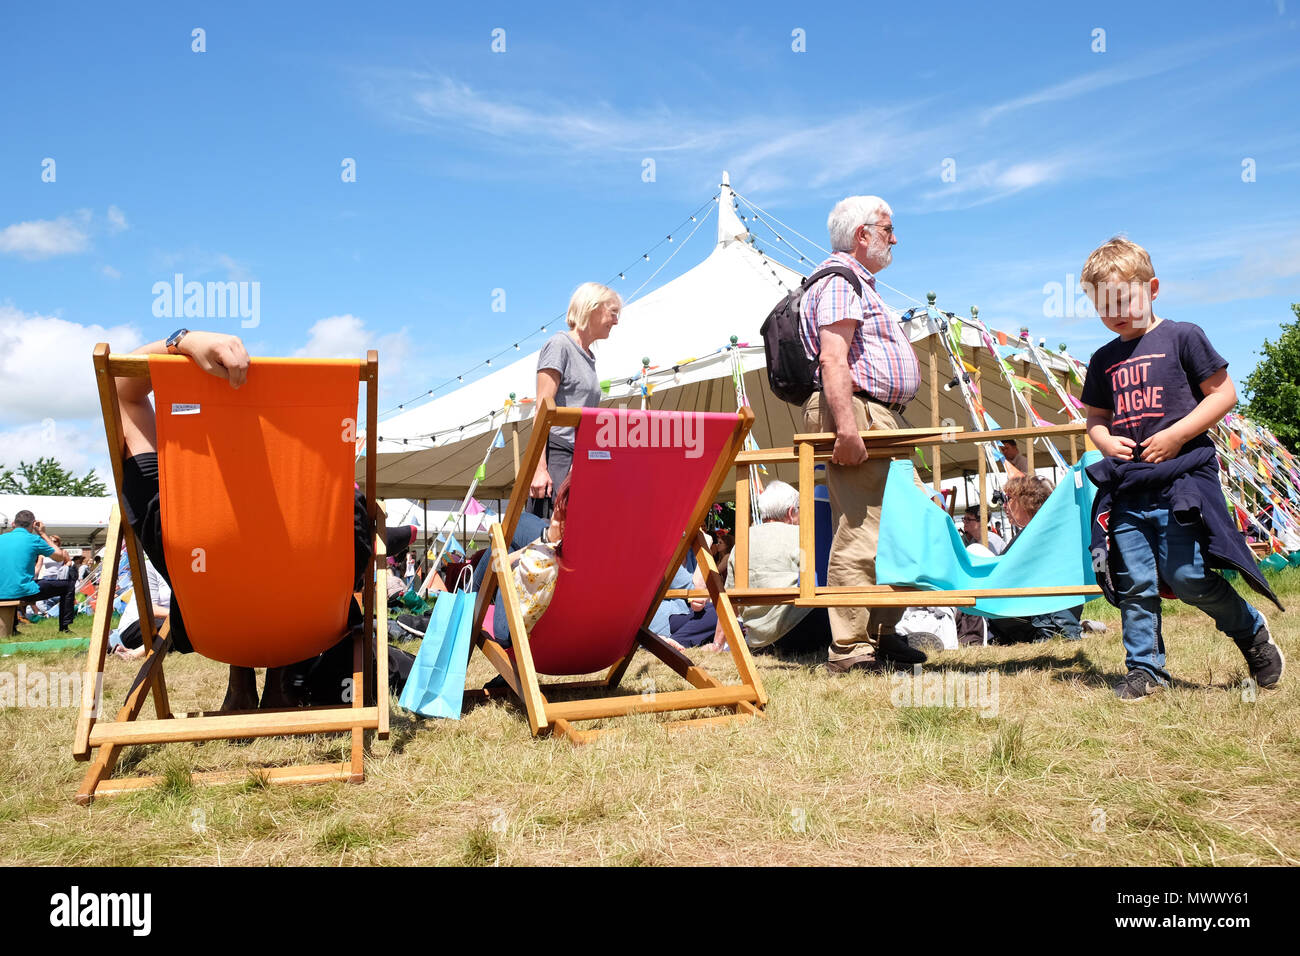 Hay on Wye, UK. 2nd June 2018. Hay Festival. Visitors enjoy the chance to sit and relax in warm sunshine on the Festival lawns between events and sessions with local temperatures of 22c  - The Hay Festival continues to Sunday 3rd June - Photo Steven May / Alamy Live News Stock Photo